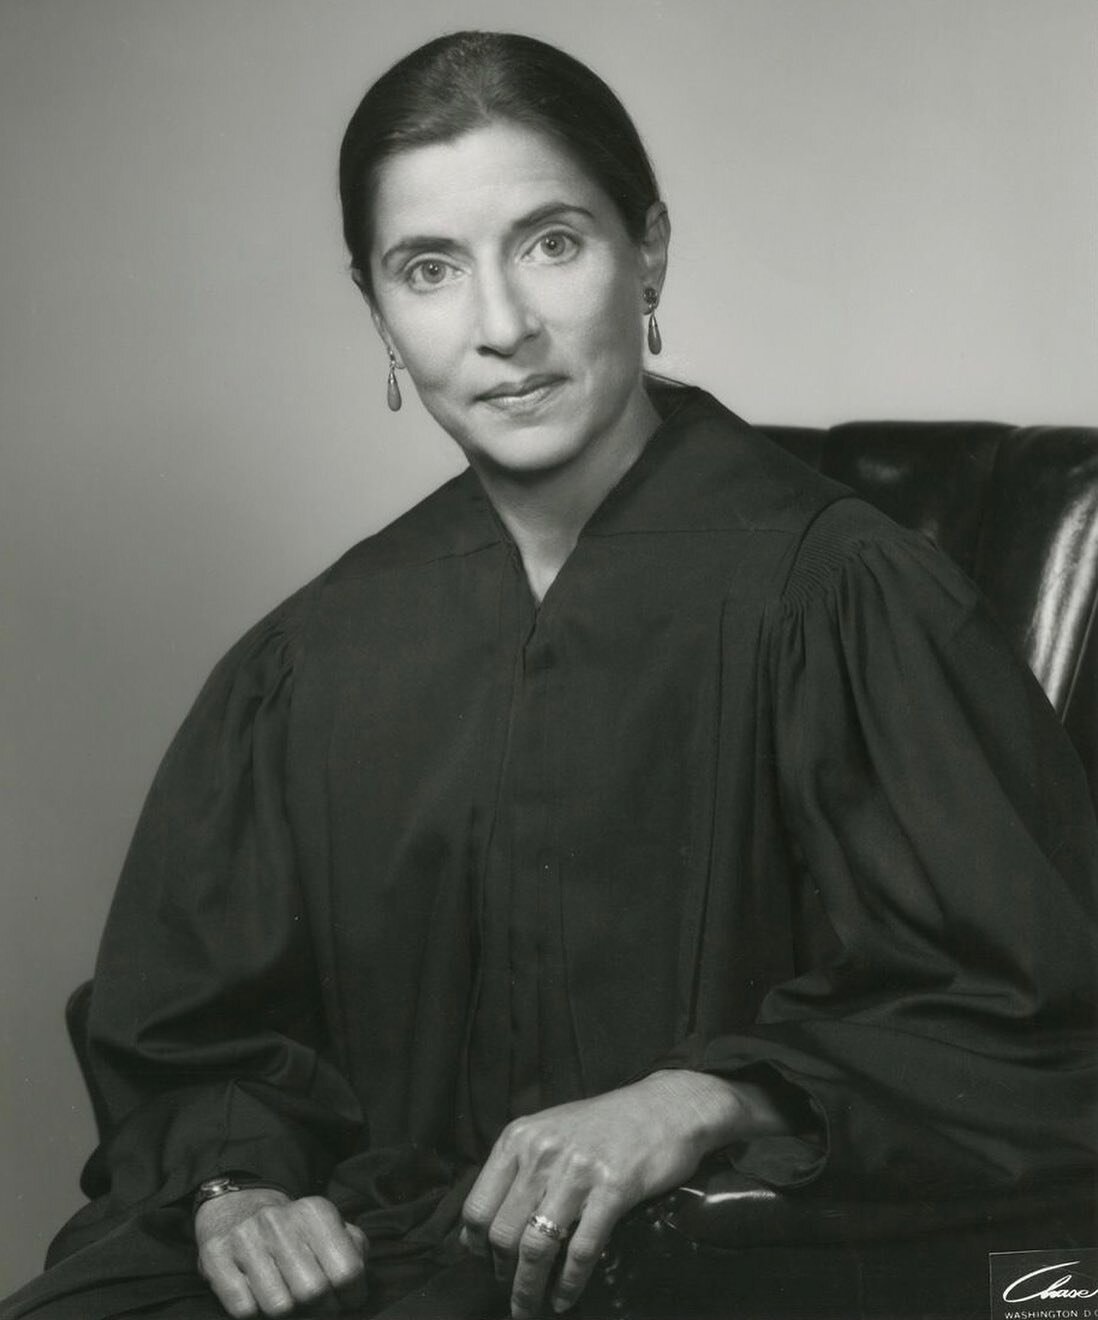 Ruth Bader Ginsburg spent her life fighting to make this world a more equal place than she had found it. Her actions made room for so many others to live the life they not only dreamed of but deserved. We mourn her passing and the weight she was forc